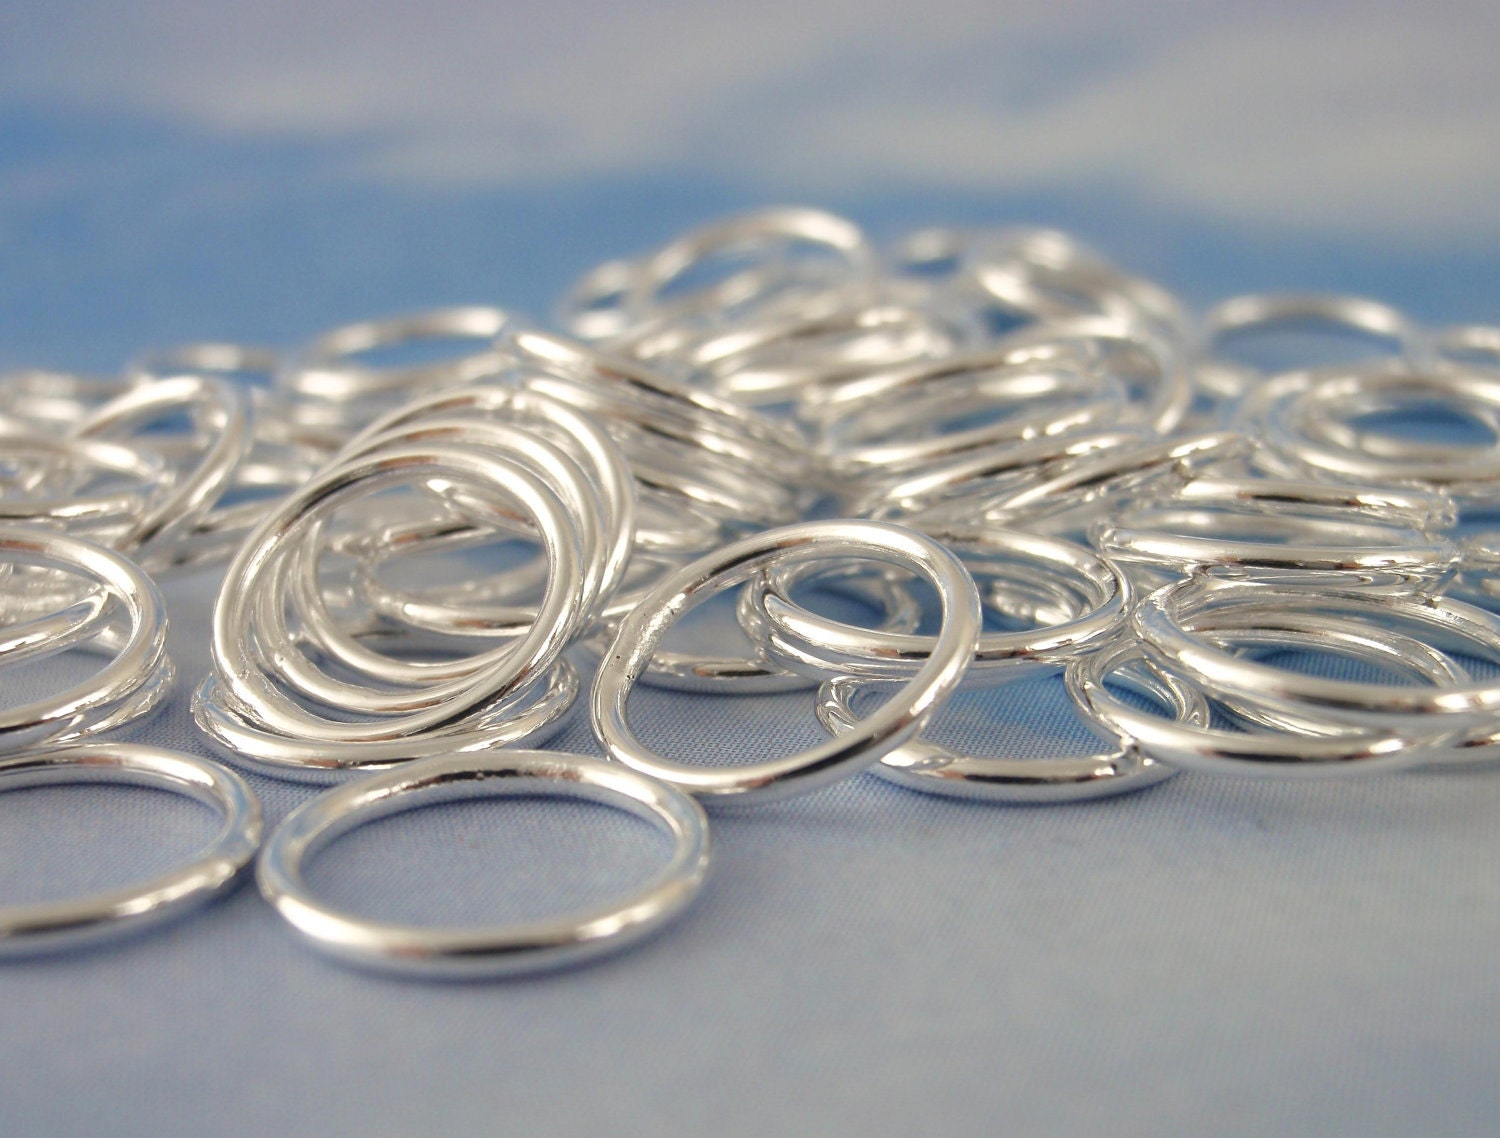 Sterling Silver 925 Hammered Round Closed Jump rings Outside diameter 10mm